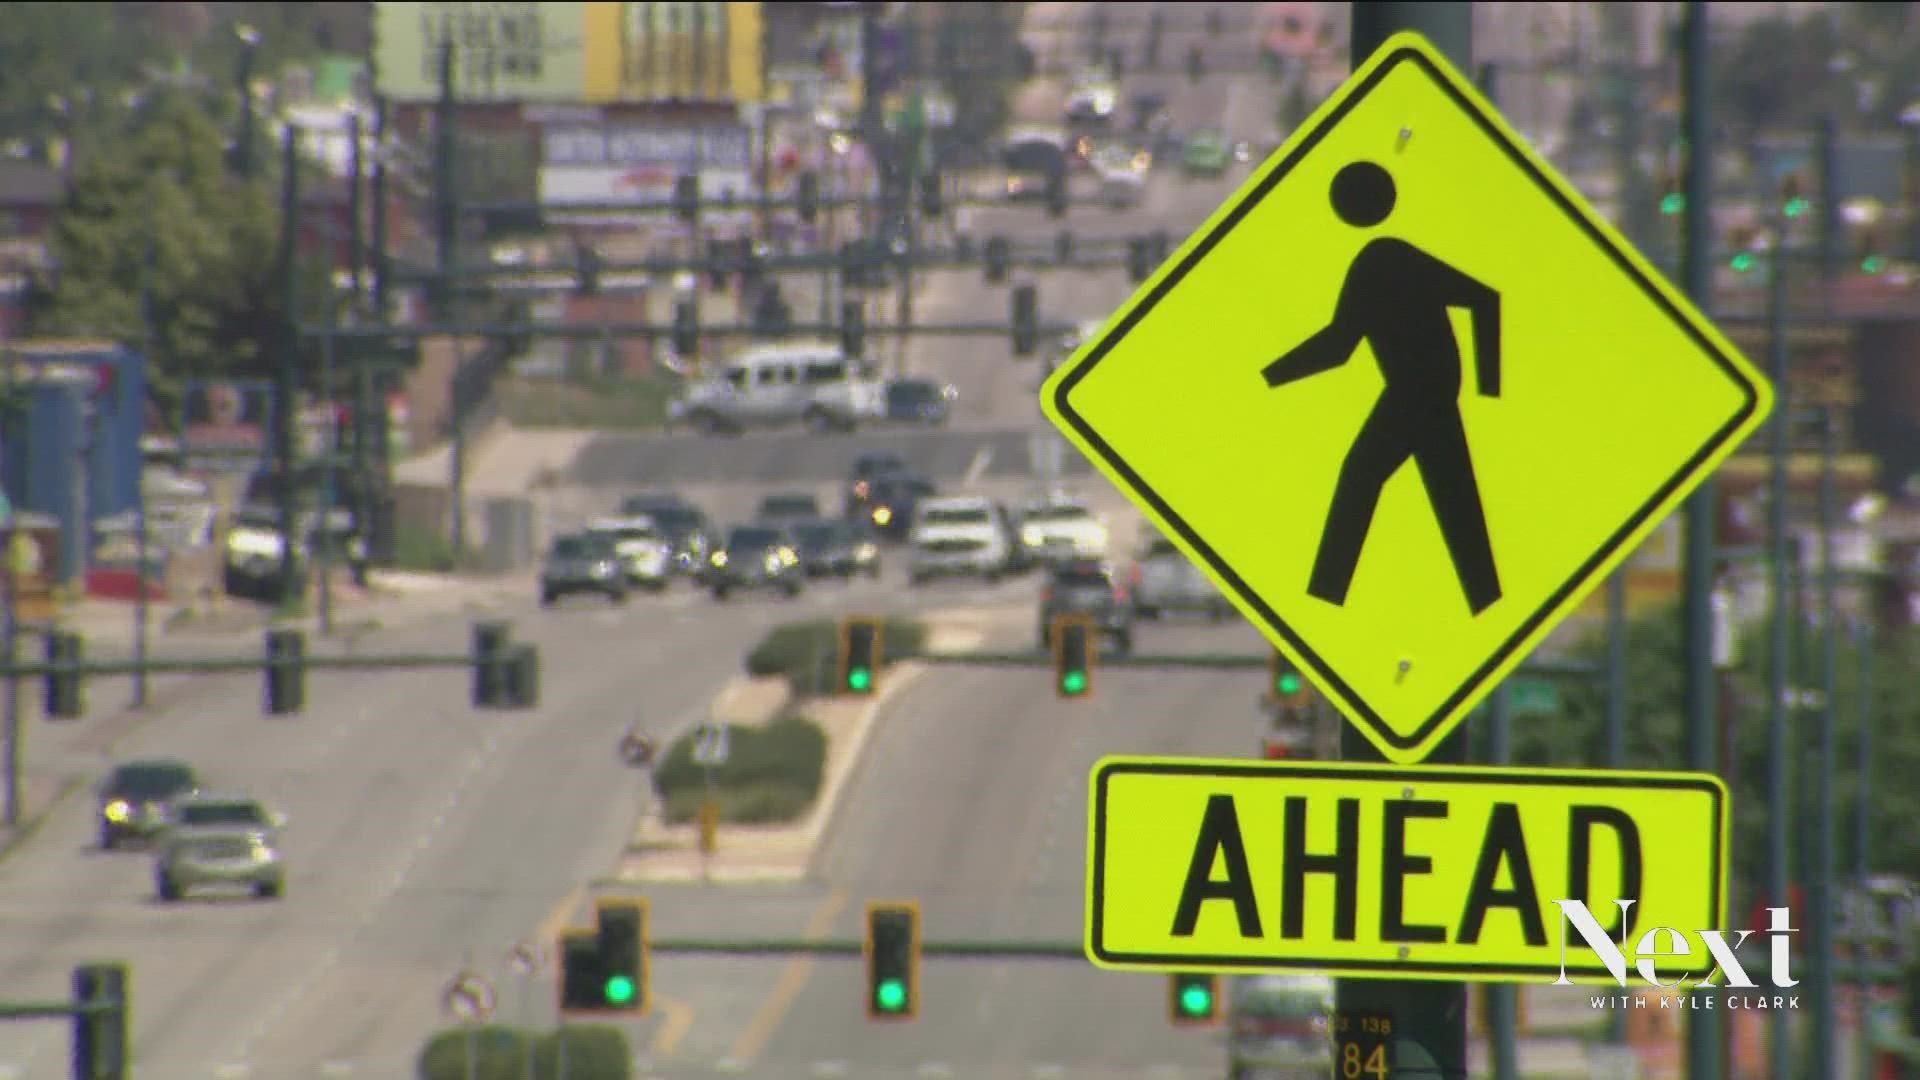 After a recent story about Colfax's design and pedestrian safety in Denver, comments poured in. We decided to explore how the concept of "jaywalking" became a thing.